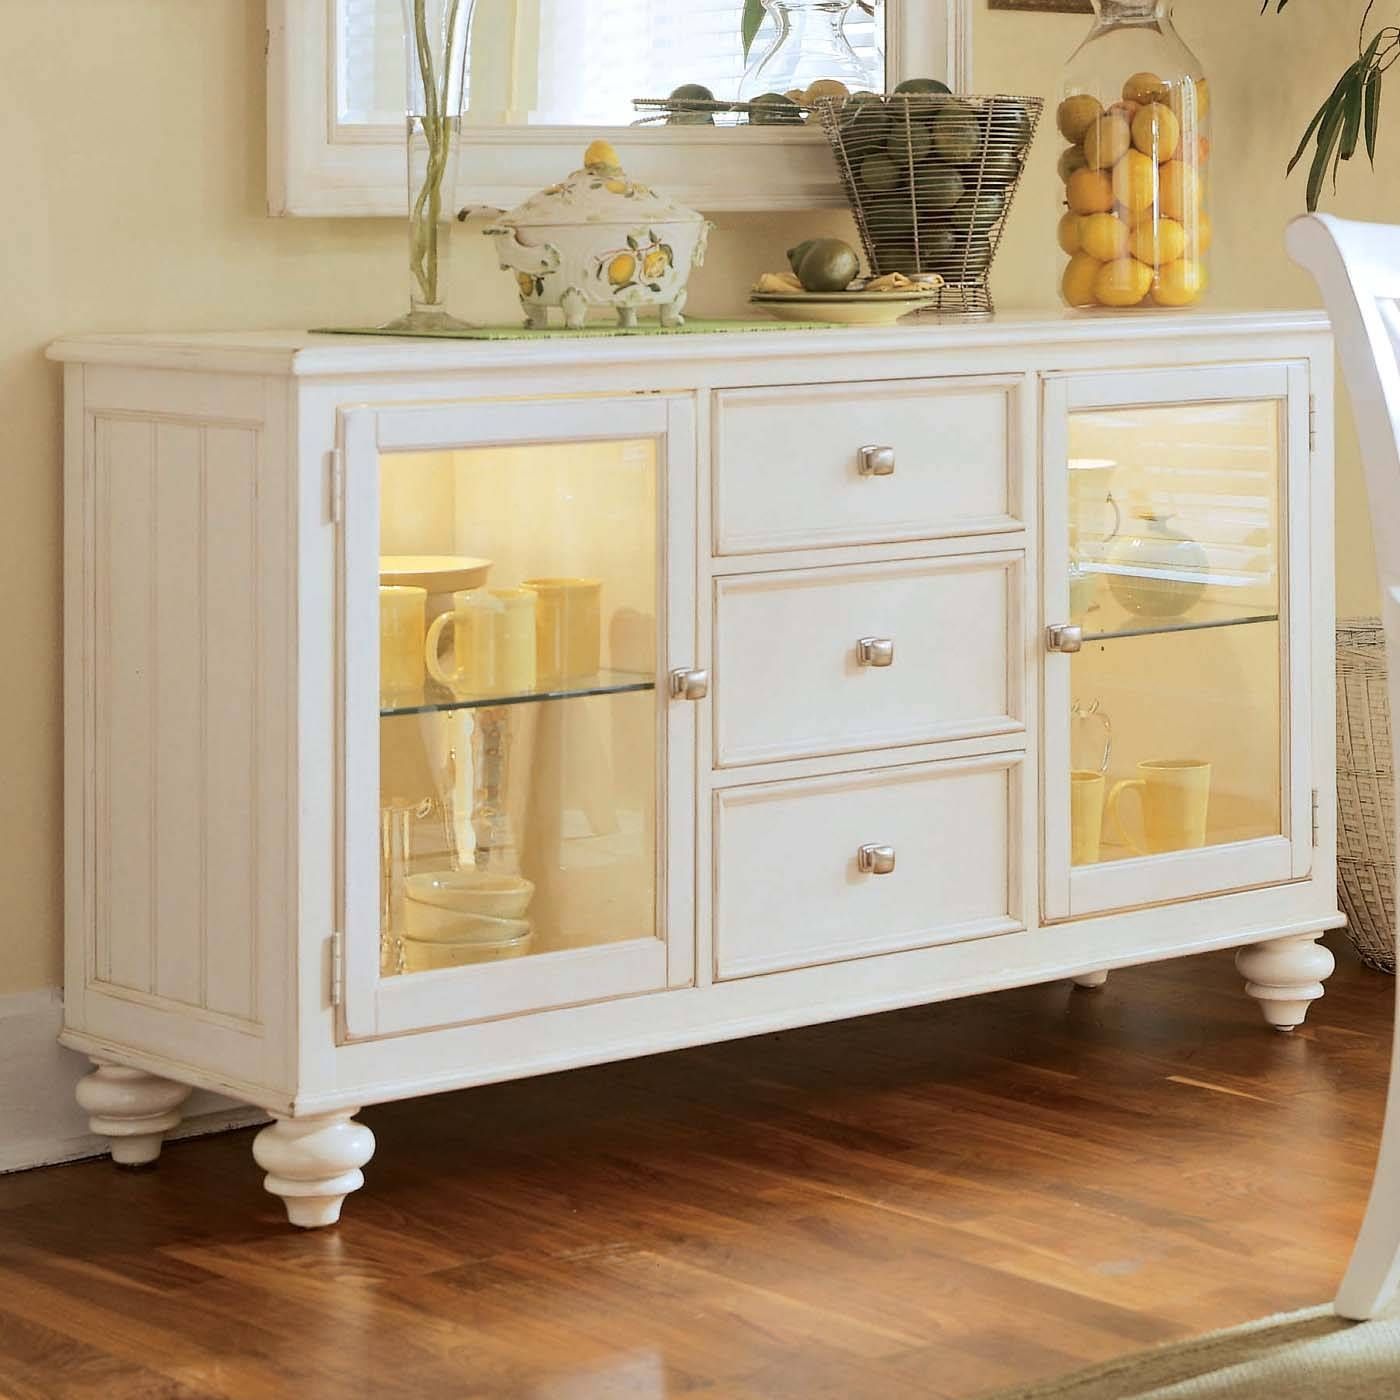 Kitchen Buffet Furniture : Cozy Rustic Kitchen Buffet Furniture For White Kitchen Sideboards (View 12 of 15)